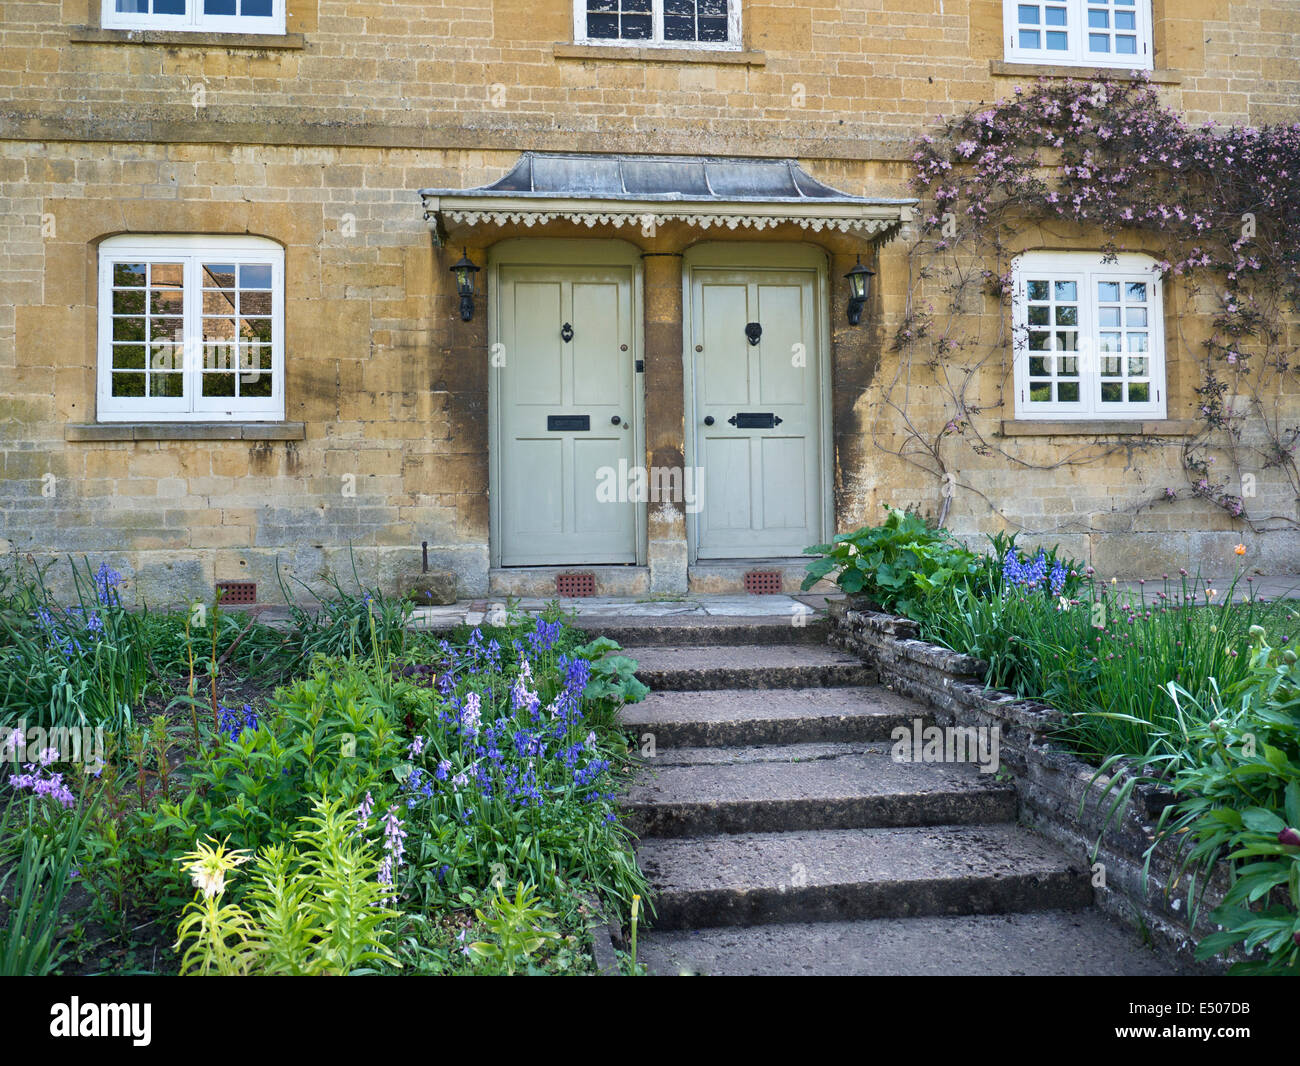 Typical stone Cotswolds cottages with shared entrance and identical front doors close together Stock Photo